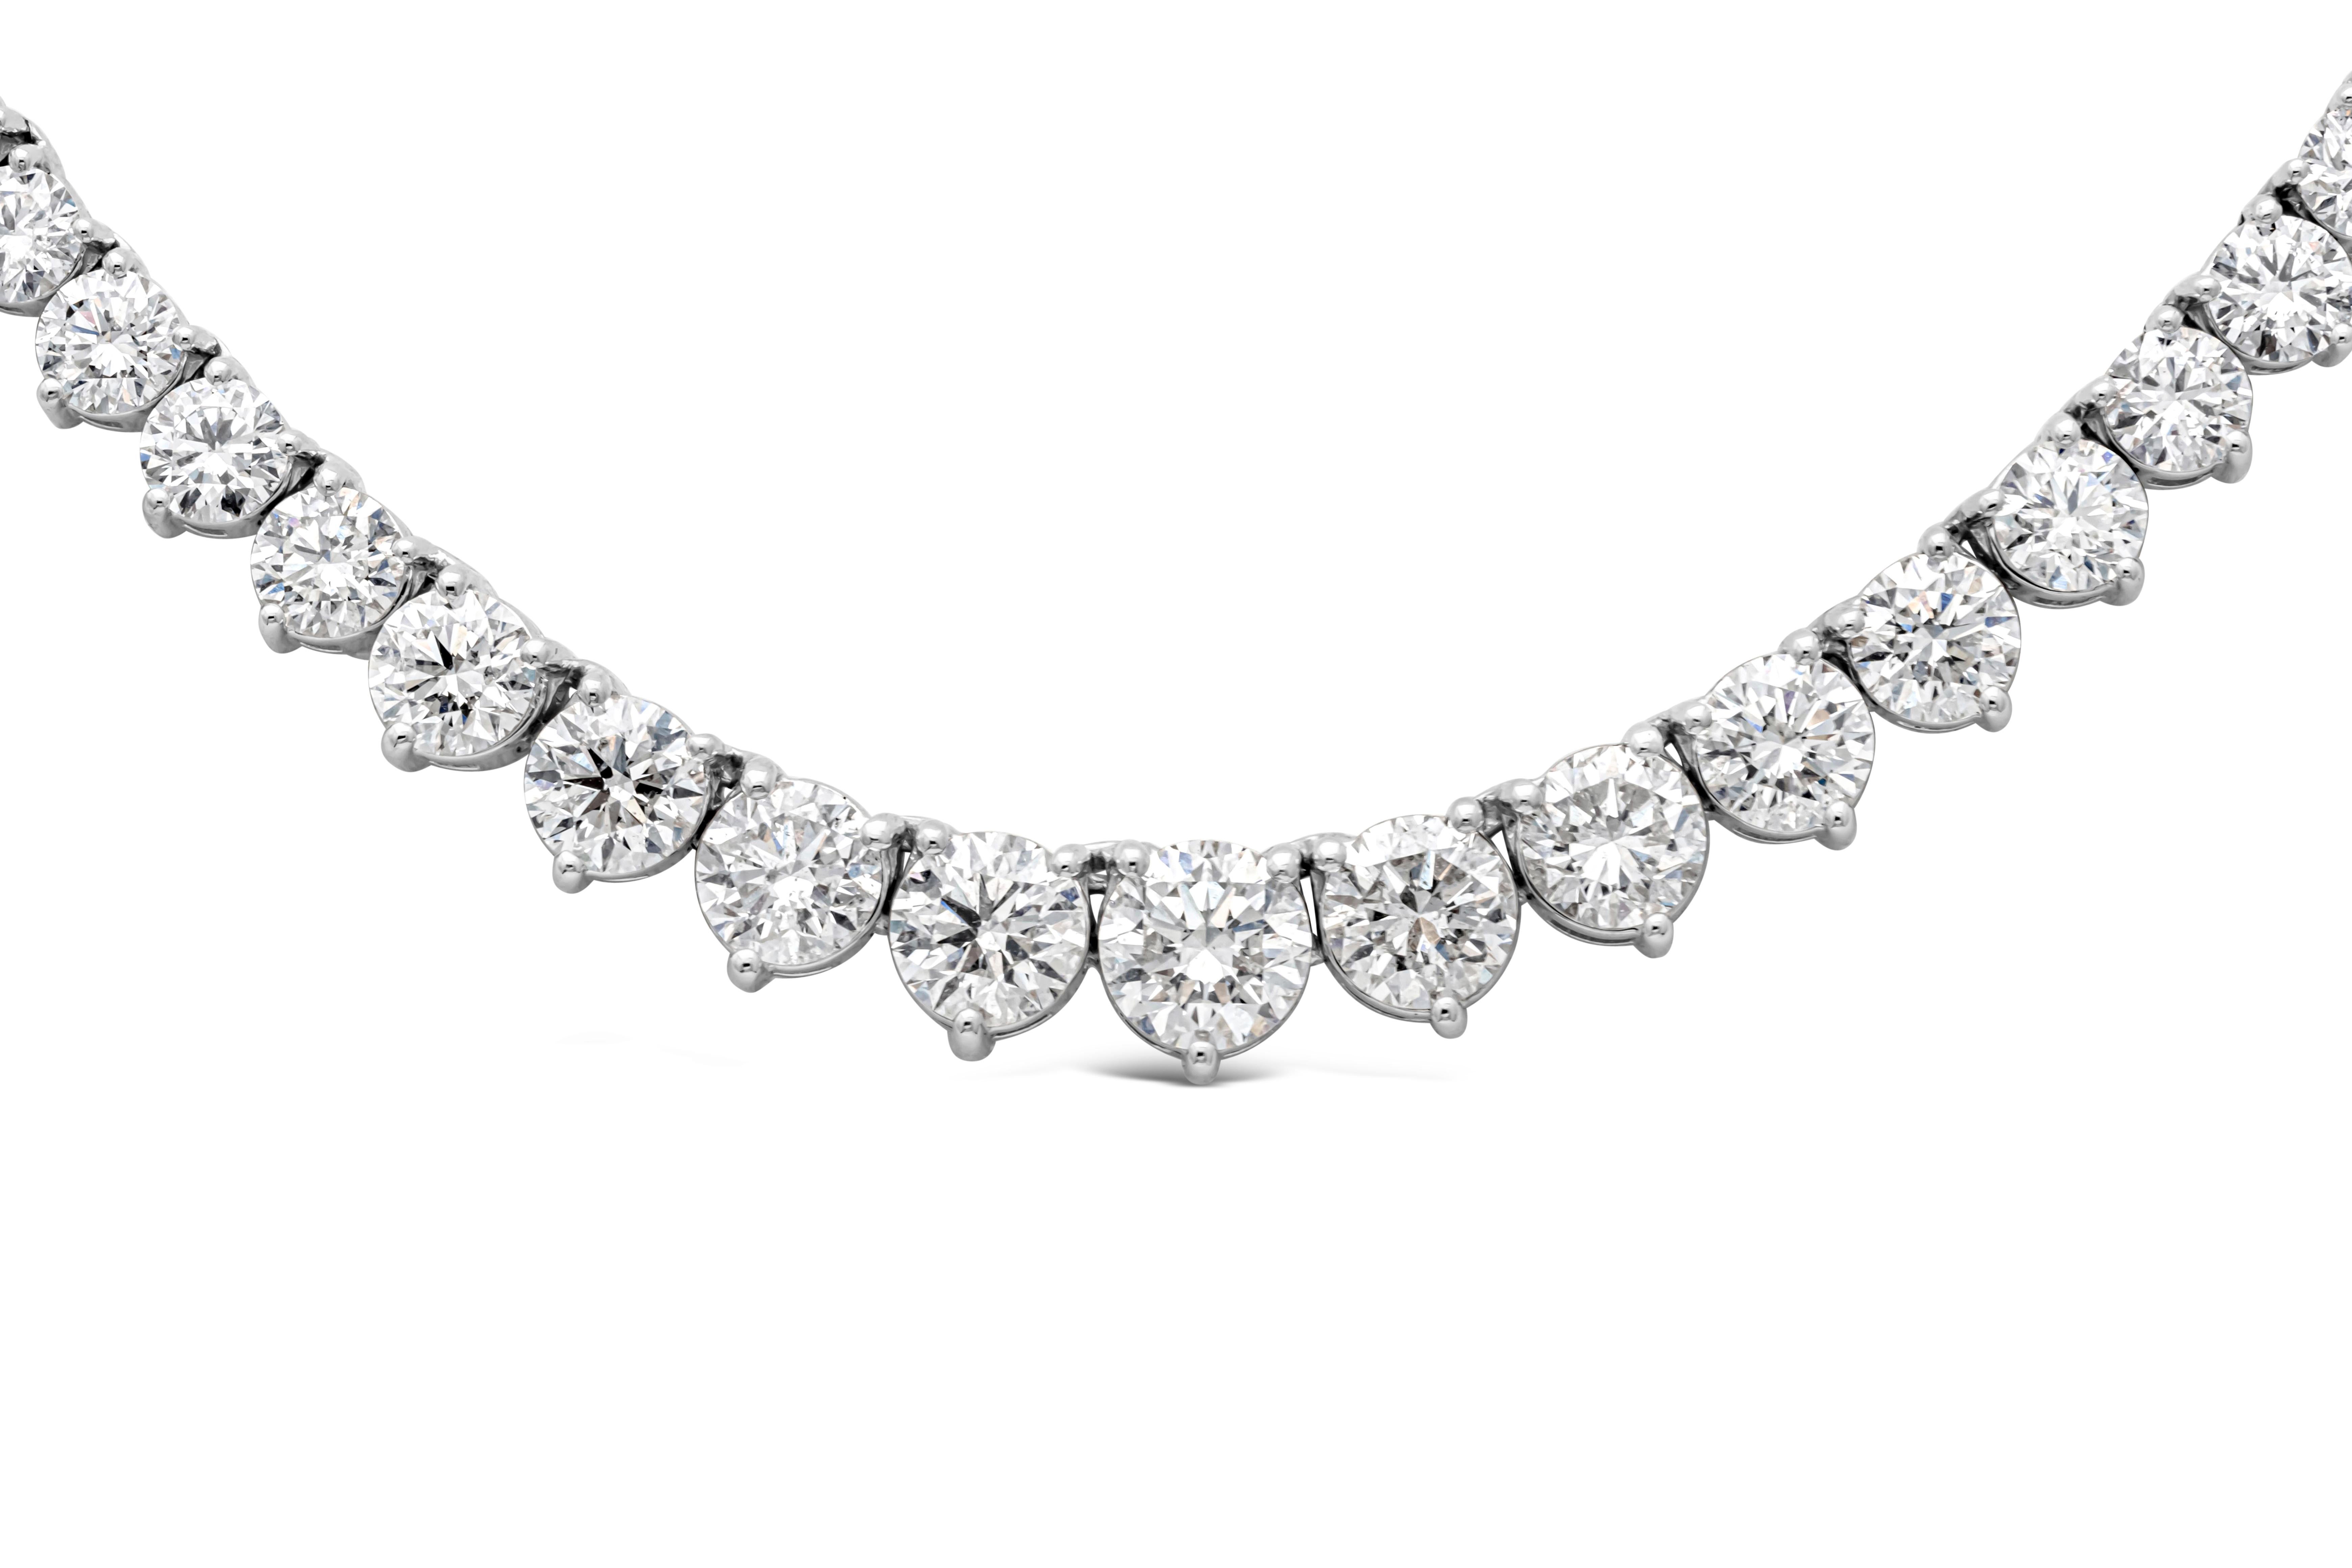 A brilliant and classic piece of jewelry showcasing a line of round brilliant diamonds that elegantly get larger to the center of the necklace. Diamonds weigh 18.00 carats total, largest diamond at the center weighs 1.02 carats E-G Color and SI in